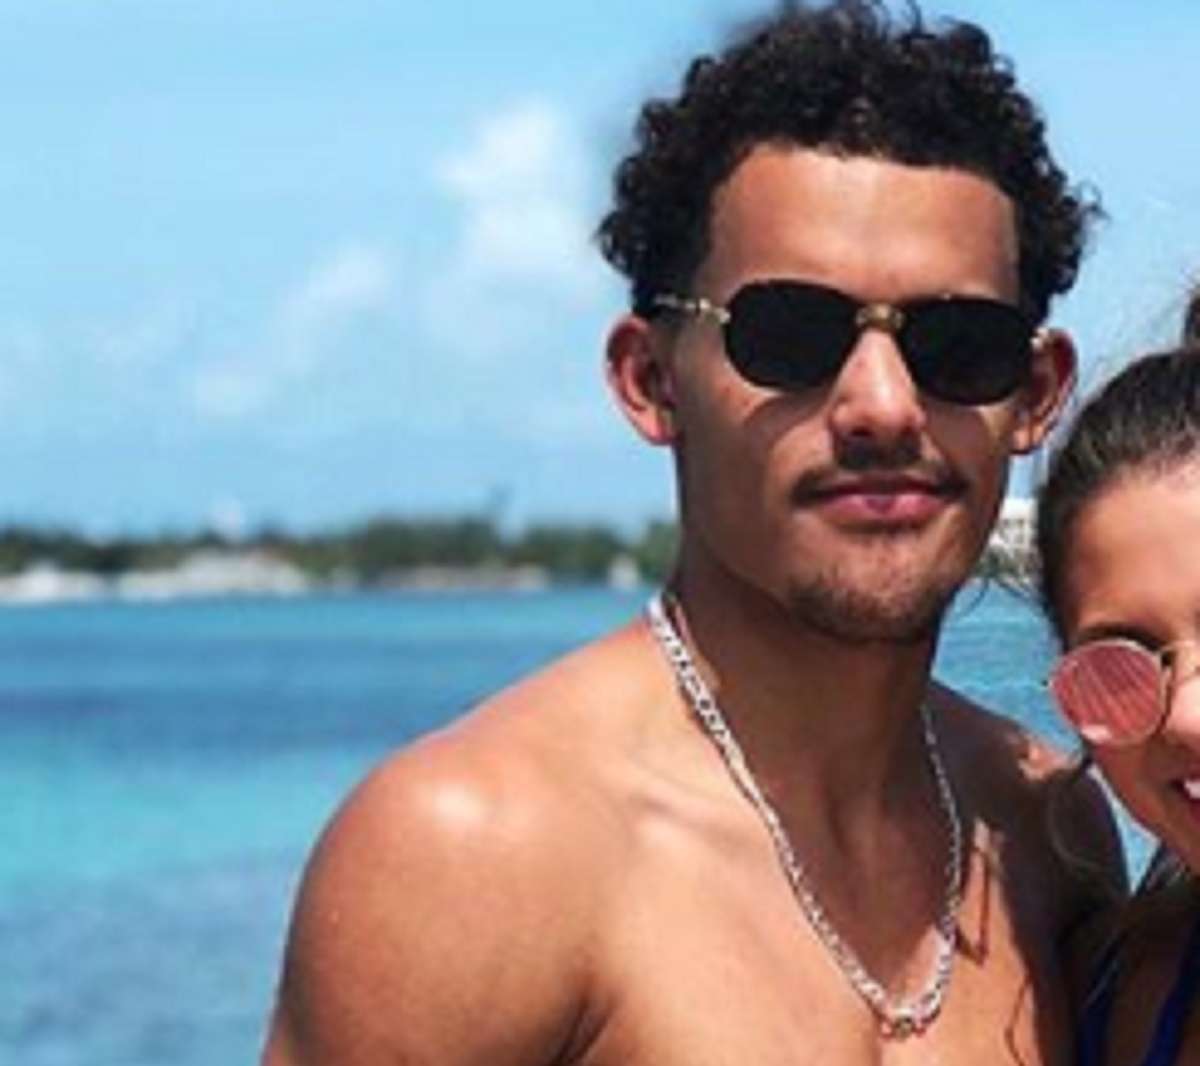 Trae Young Gay?: Trae Young Twitter Account Hacked and Sends Out Gay Tweets About Liking Big Endowment, Joe Biden, and Lakers